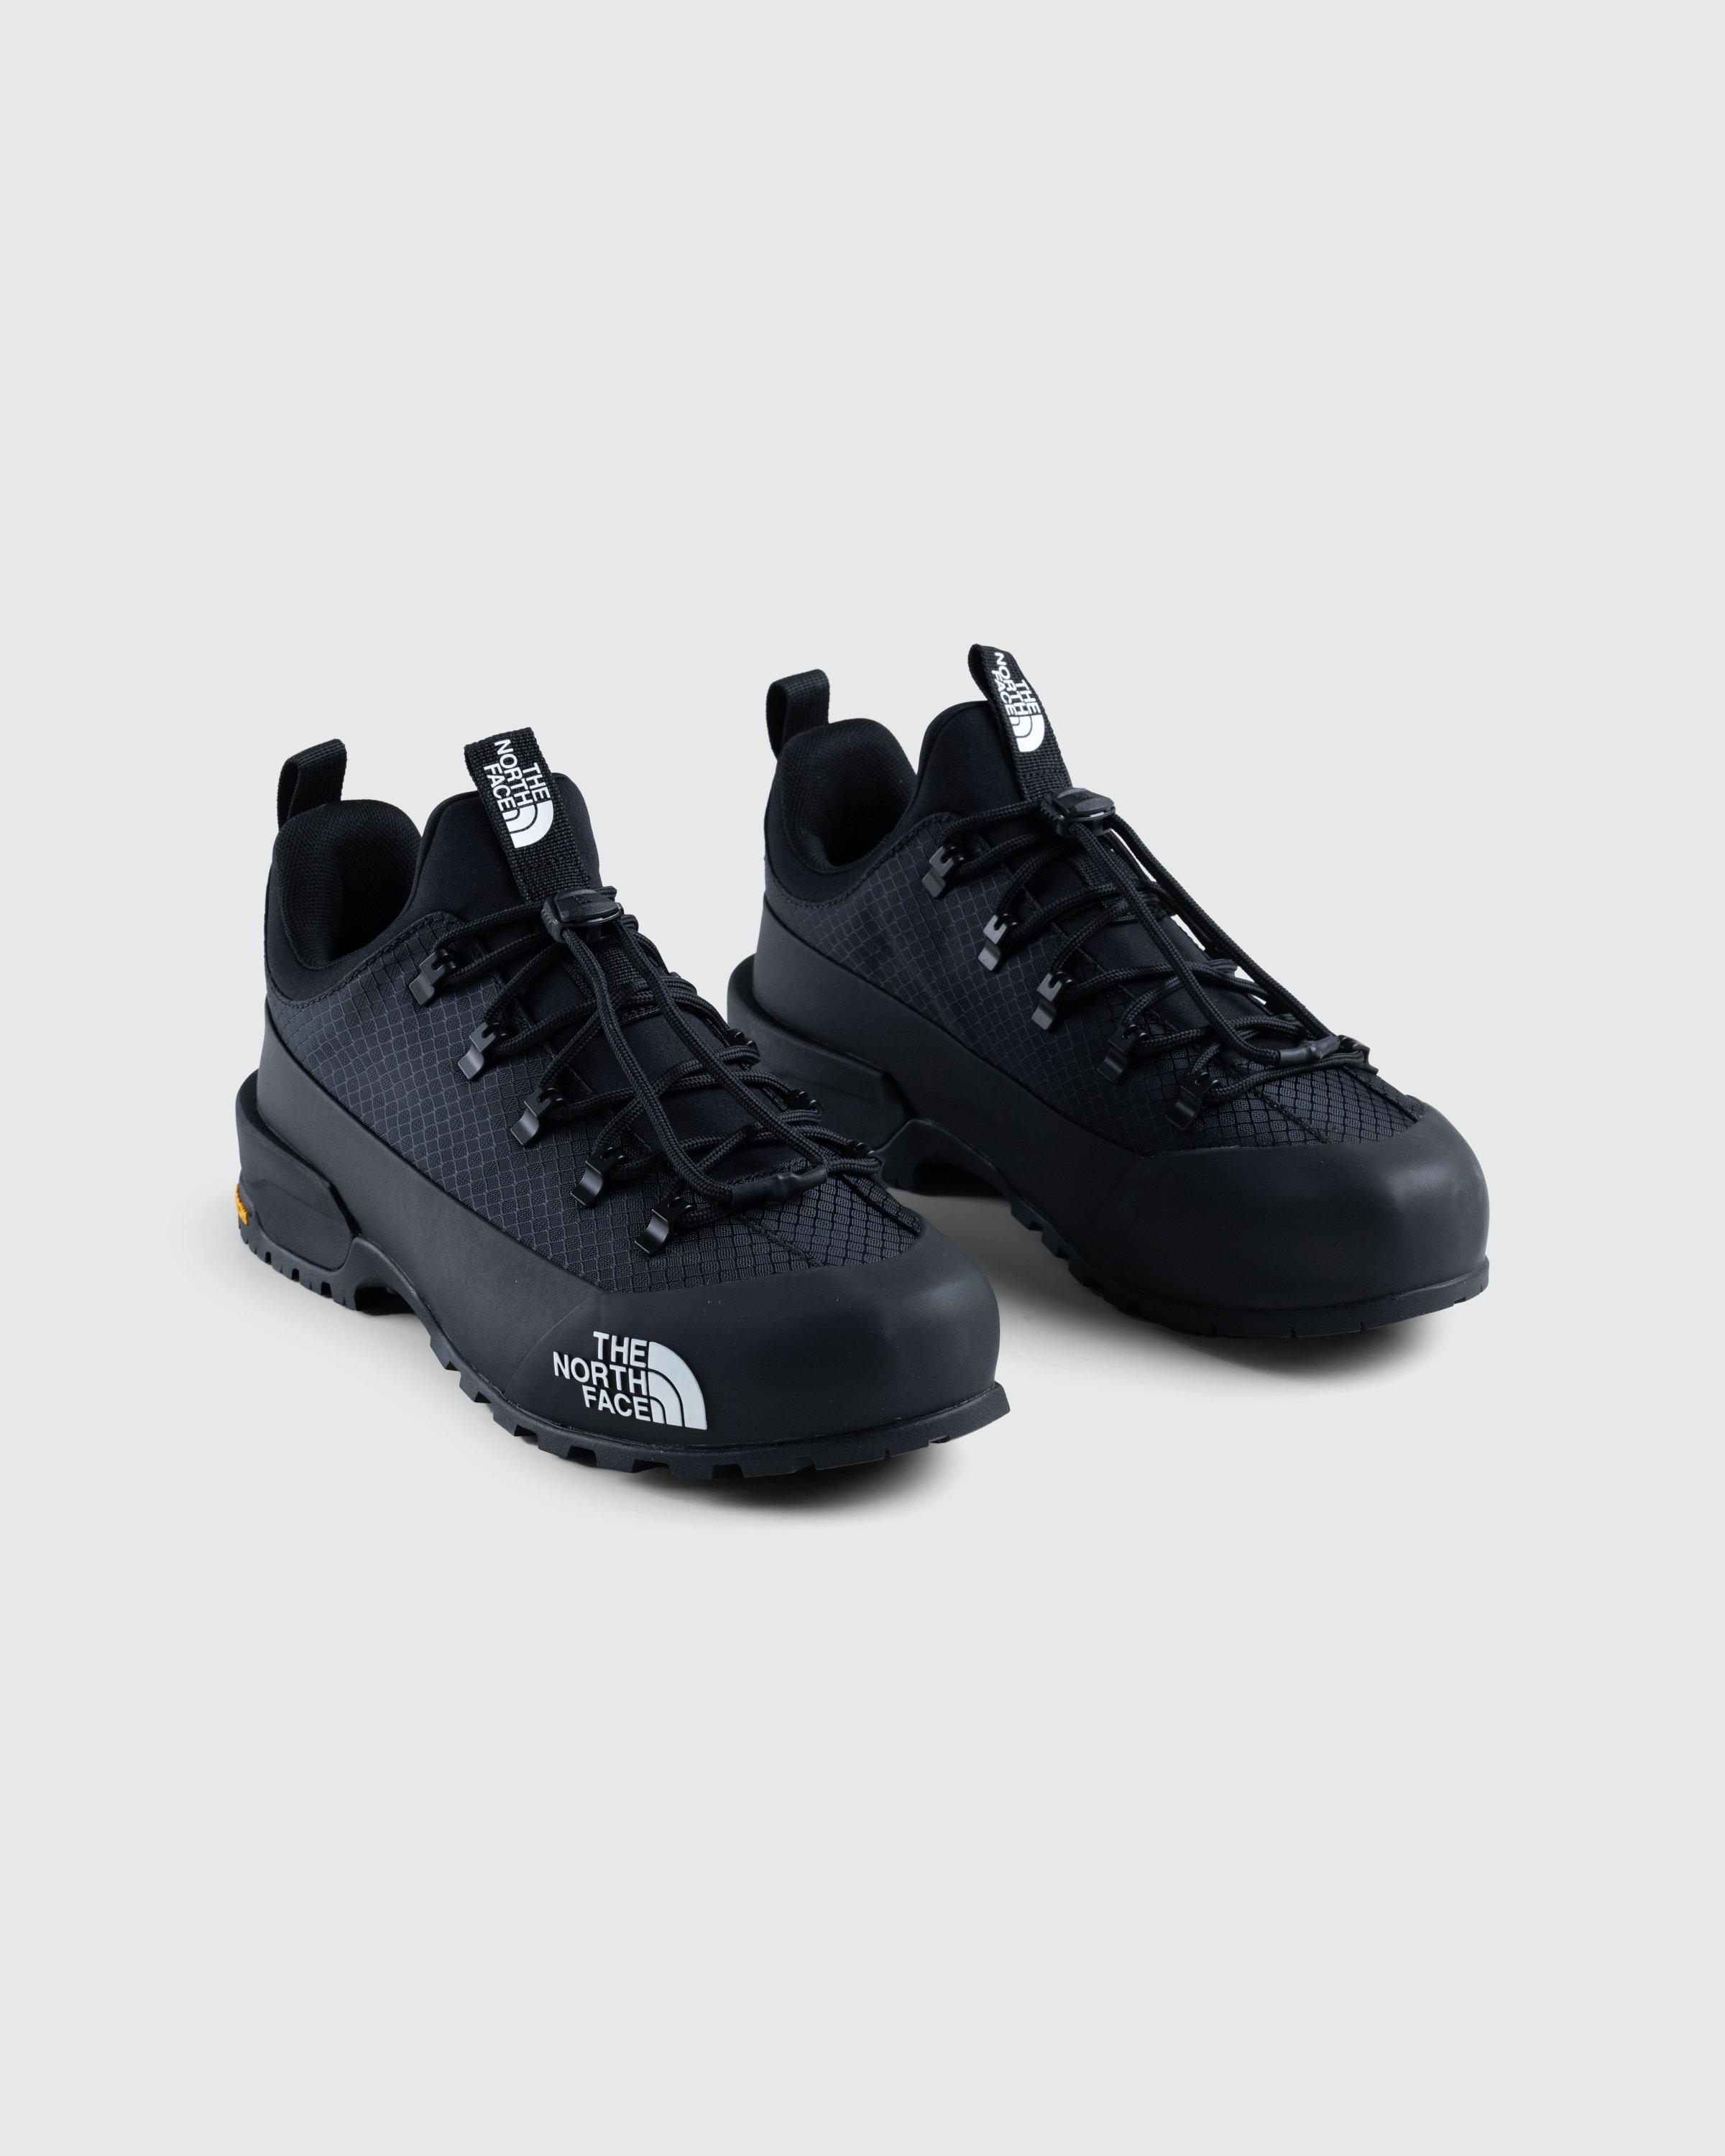 The North Face - Glenclyffe Low Black - Footwear - Black - Image 3